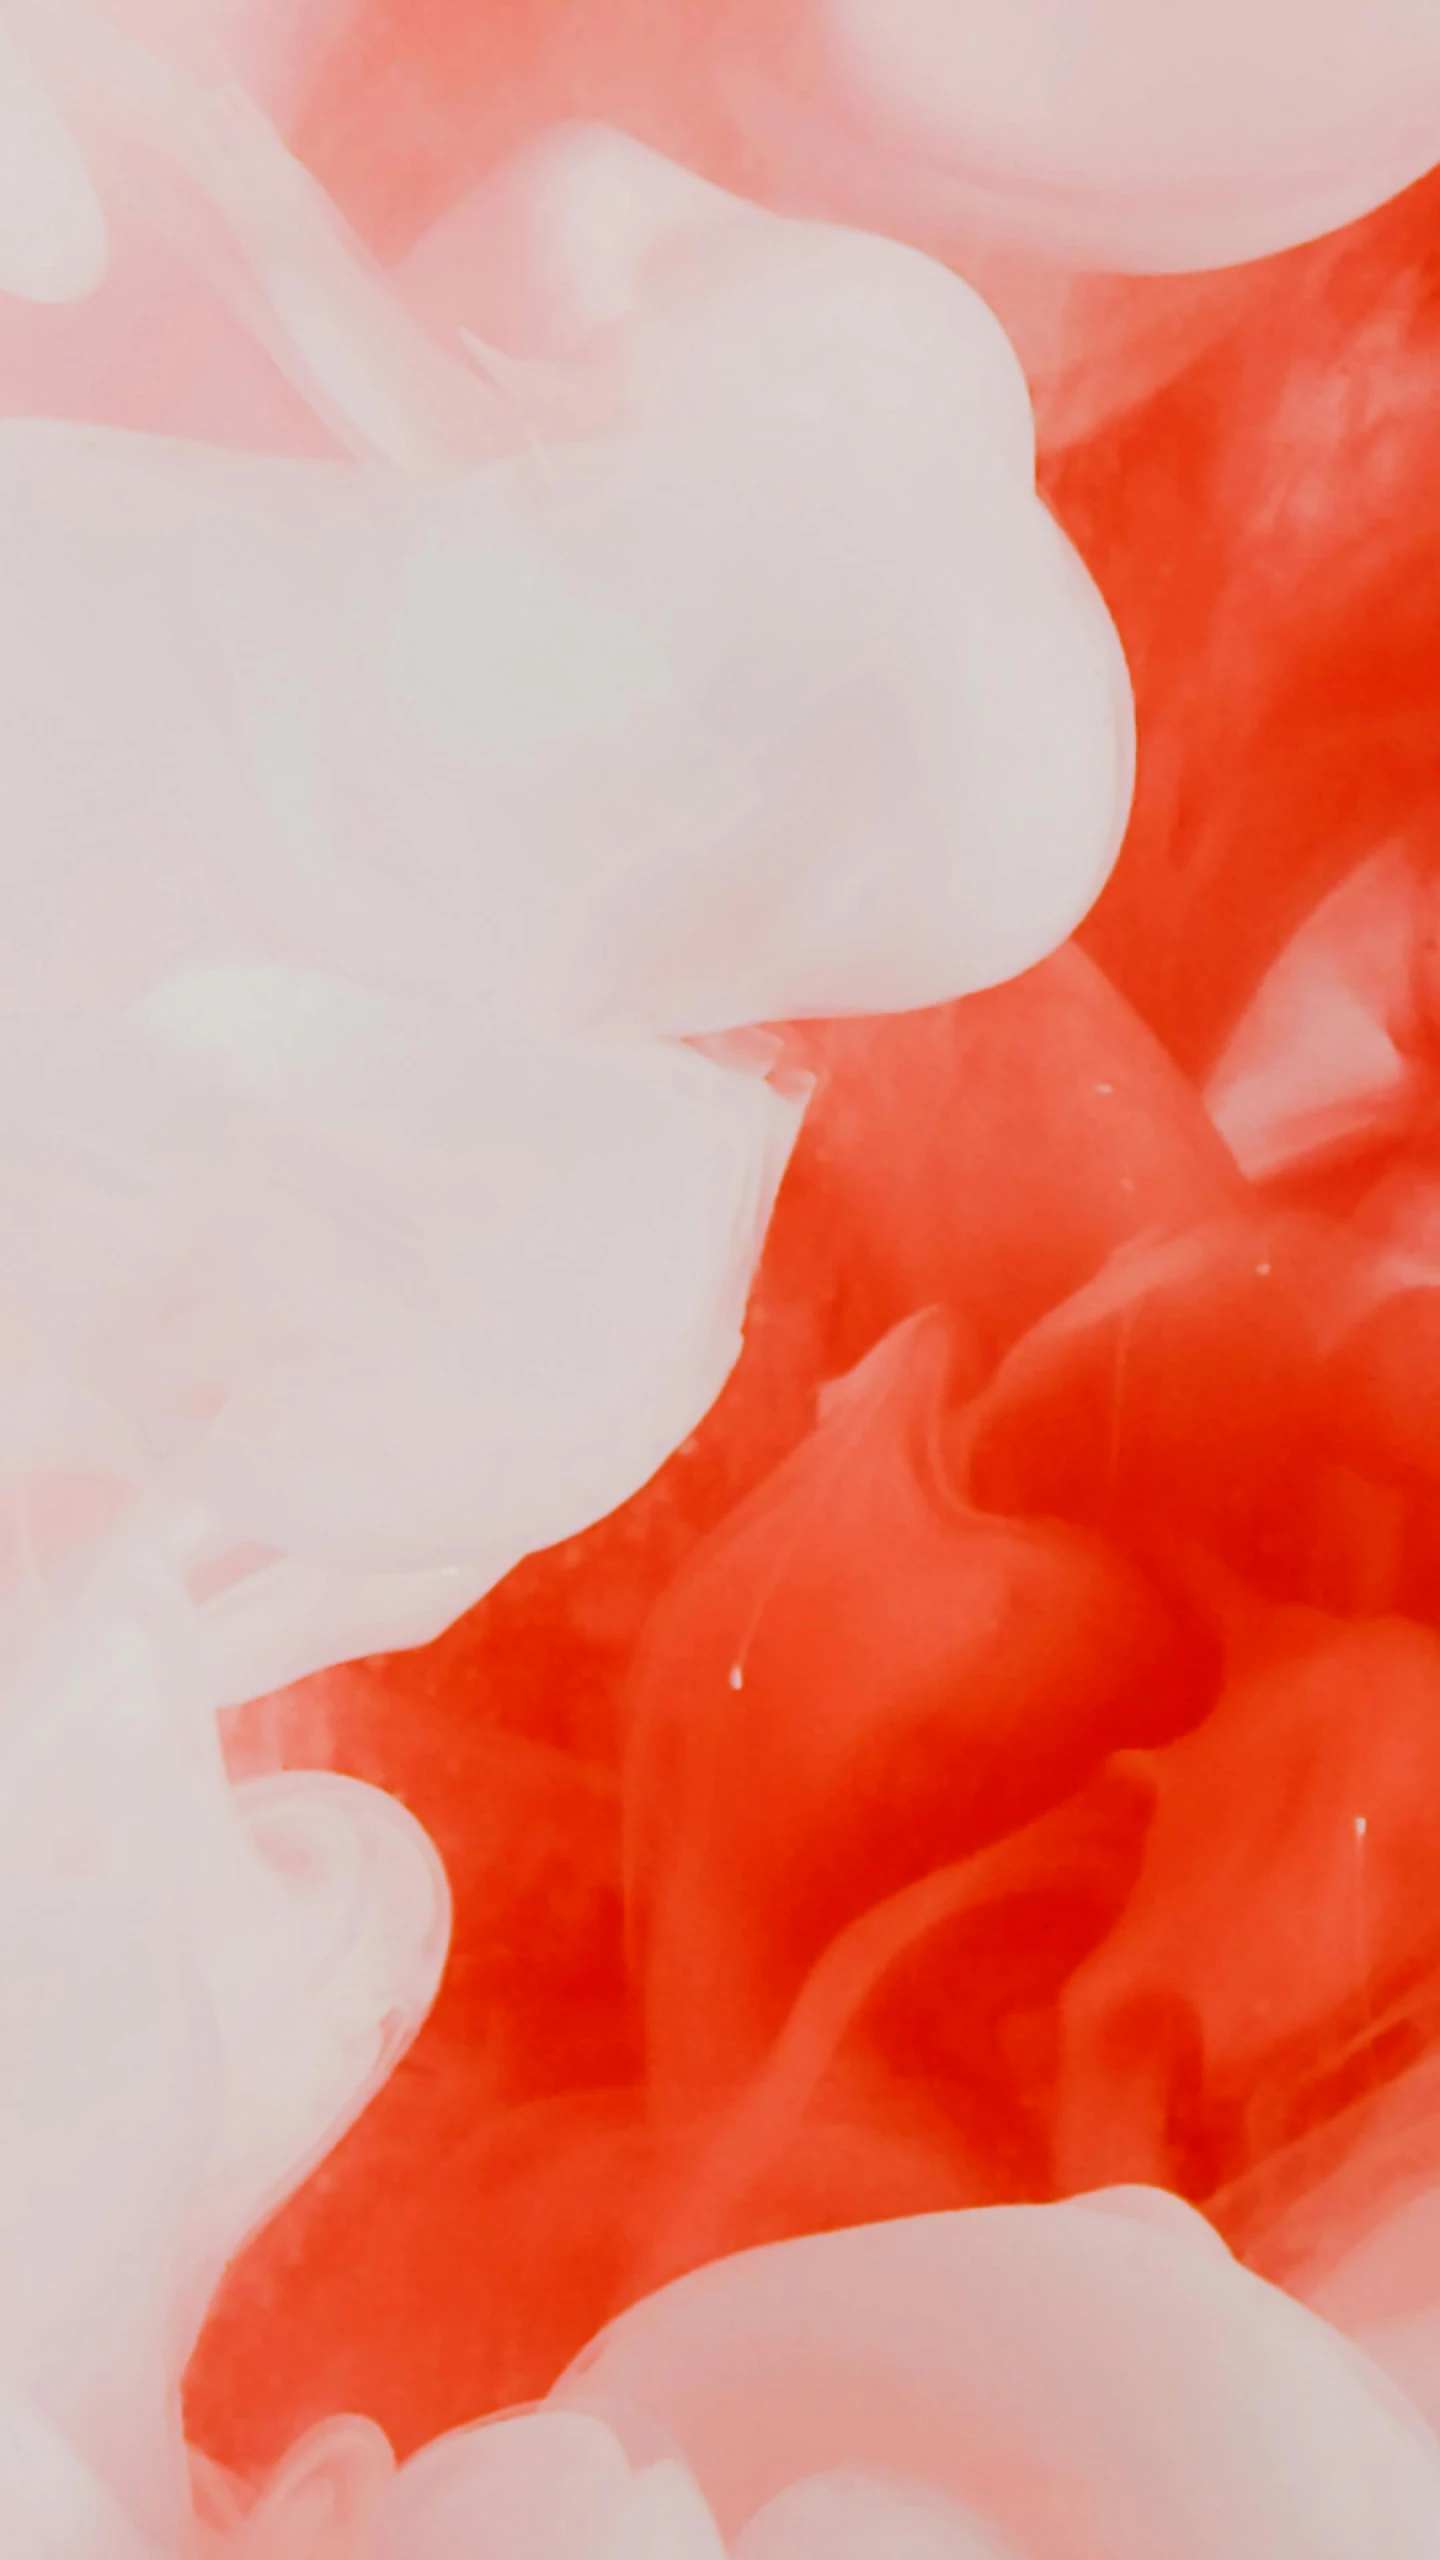 a close up of a red and white flower, an album cover, by Attila Meszlenyi, trending on pexels, lyrical abstraction, made of cotton candy, 15081959 21121991 01012000 4k, abstract smoke neon, orange color